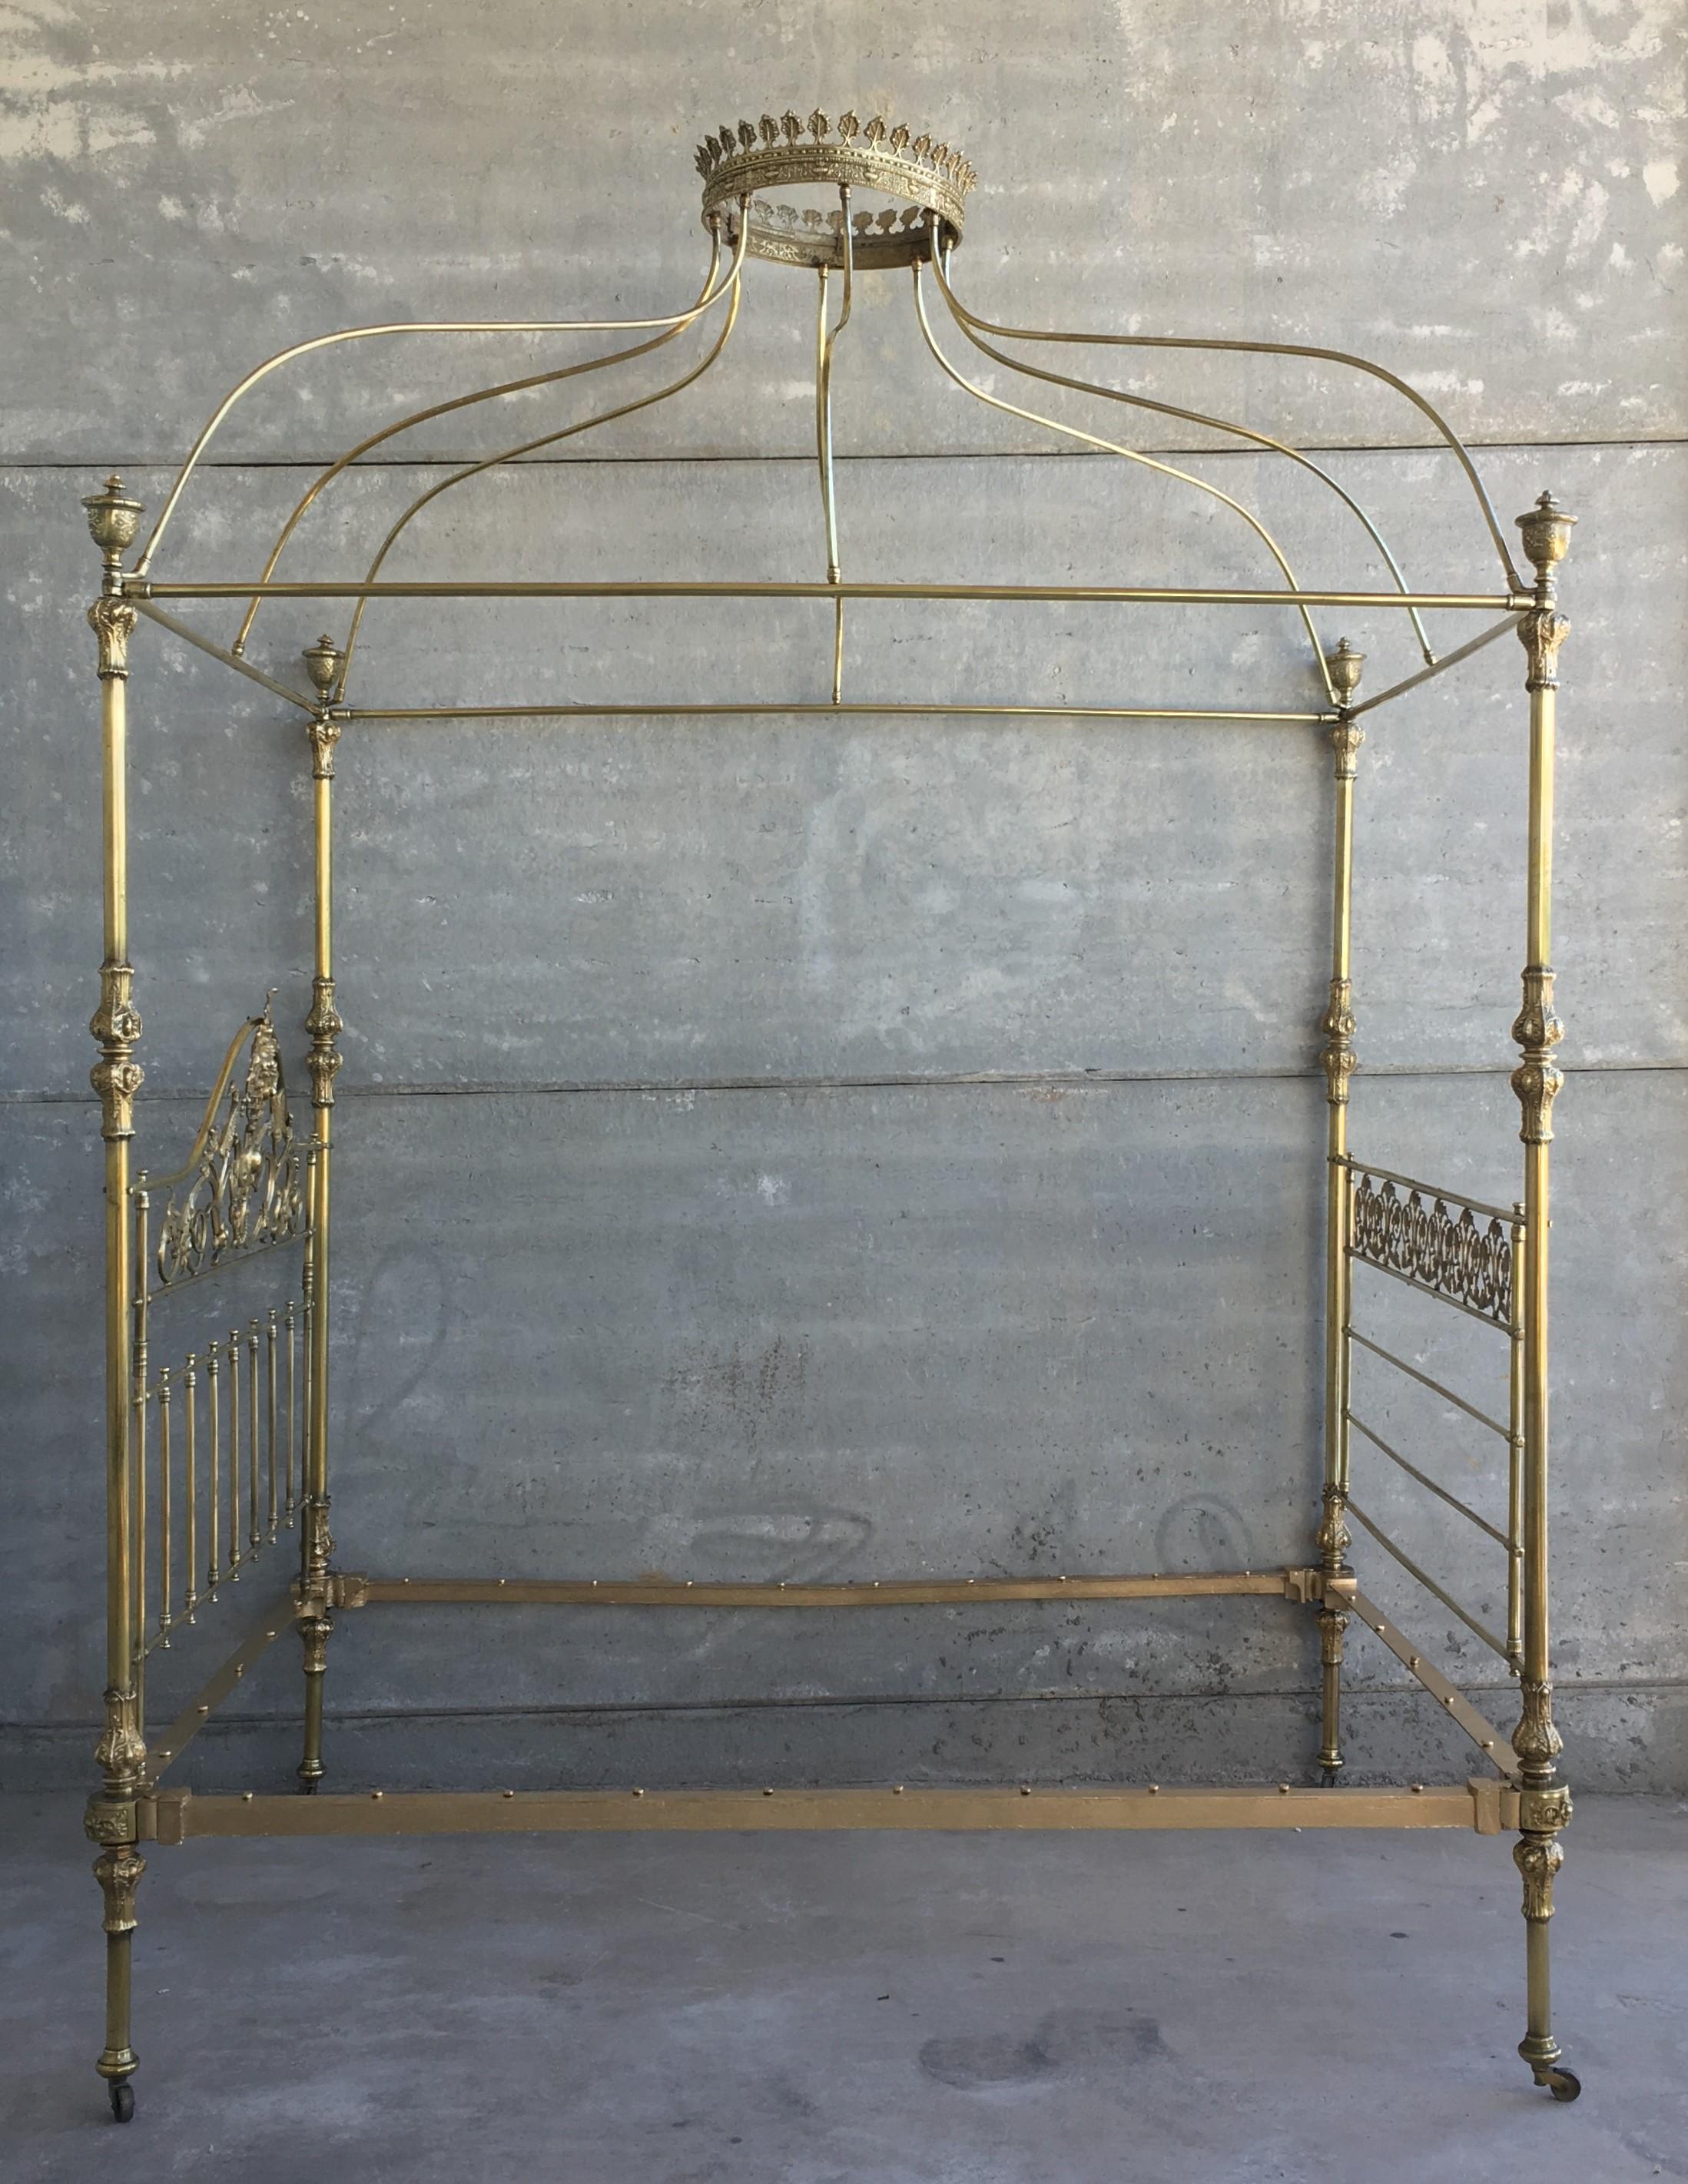 19th Century Wide Brass Four Poster Bed with Bird Castings, Ornamental Motifs and Crown